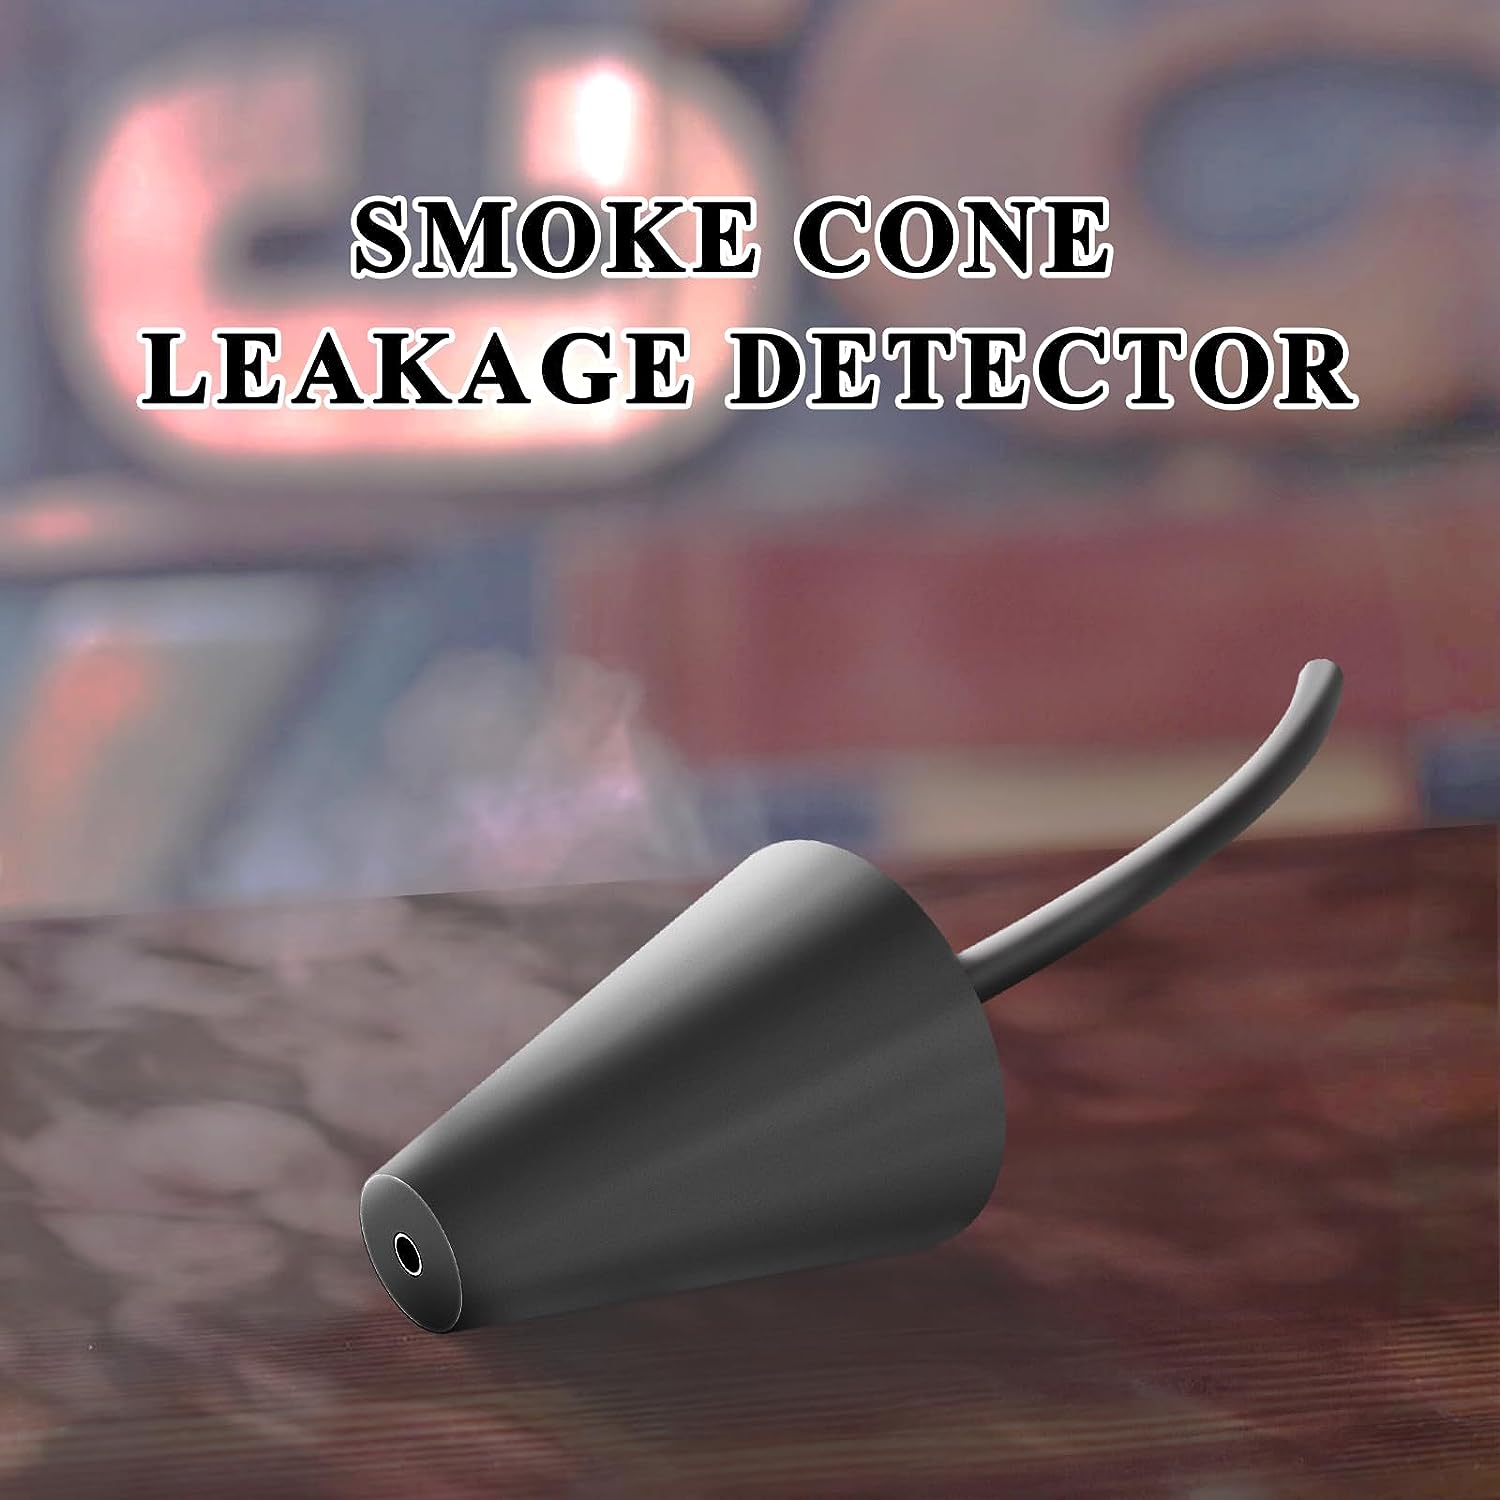 Solary Automotive Smoke Cone Adapter Leak-Detector - for Exhaust and Intake Diagnostics - Auto Body Collision Repair Welding Products